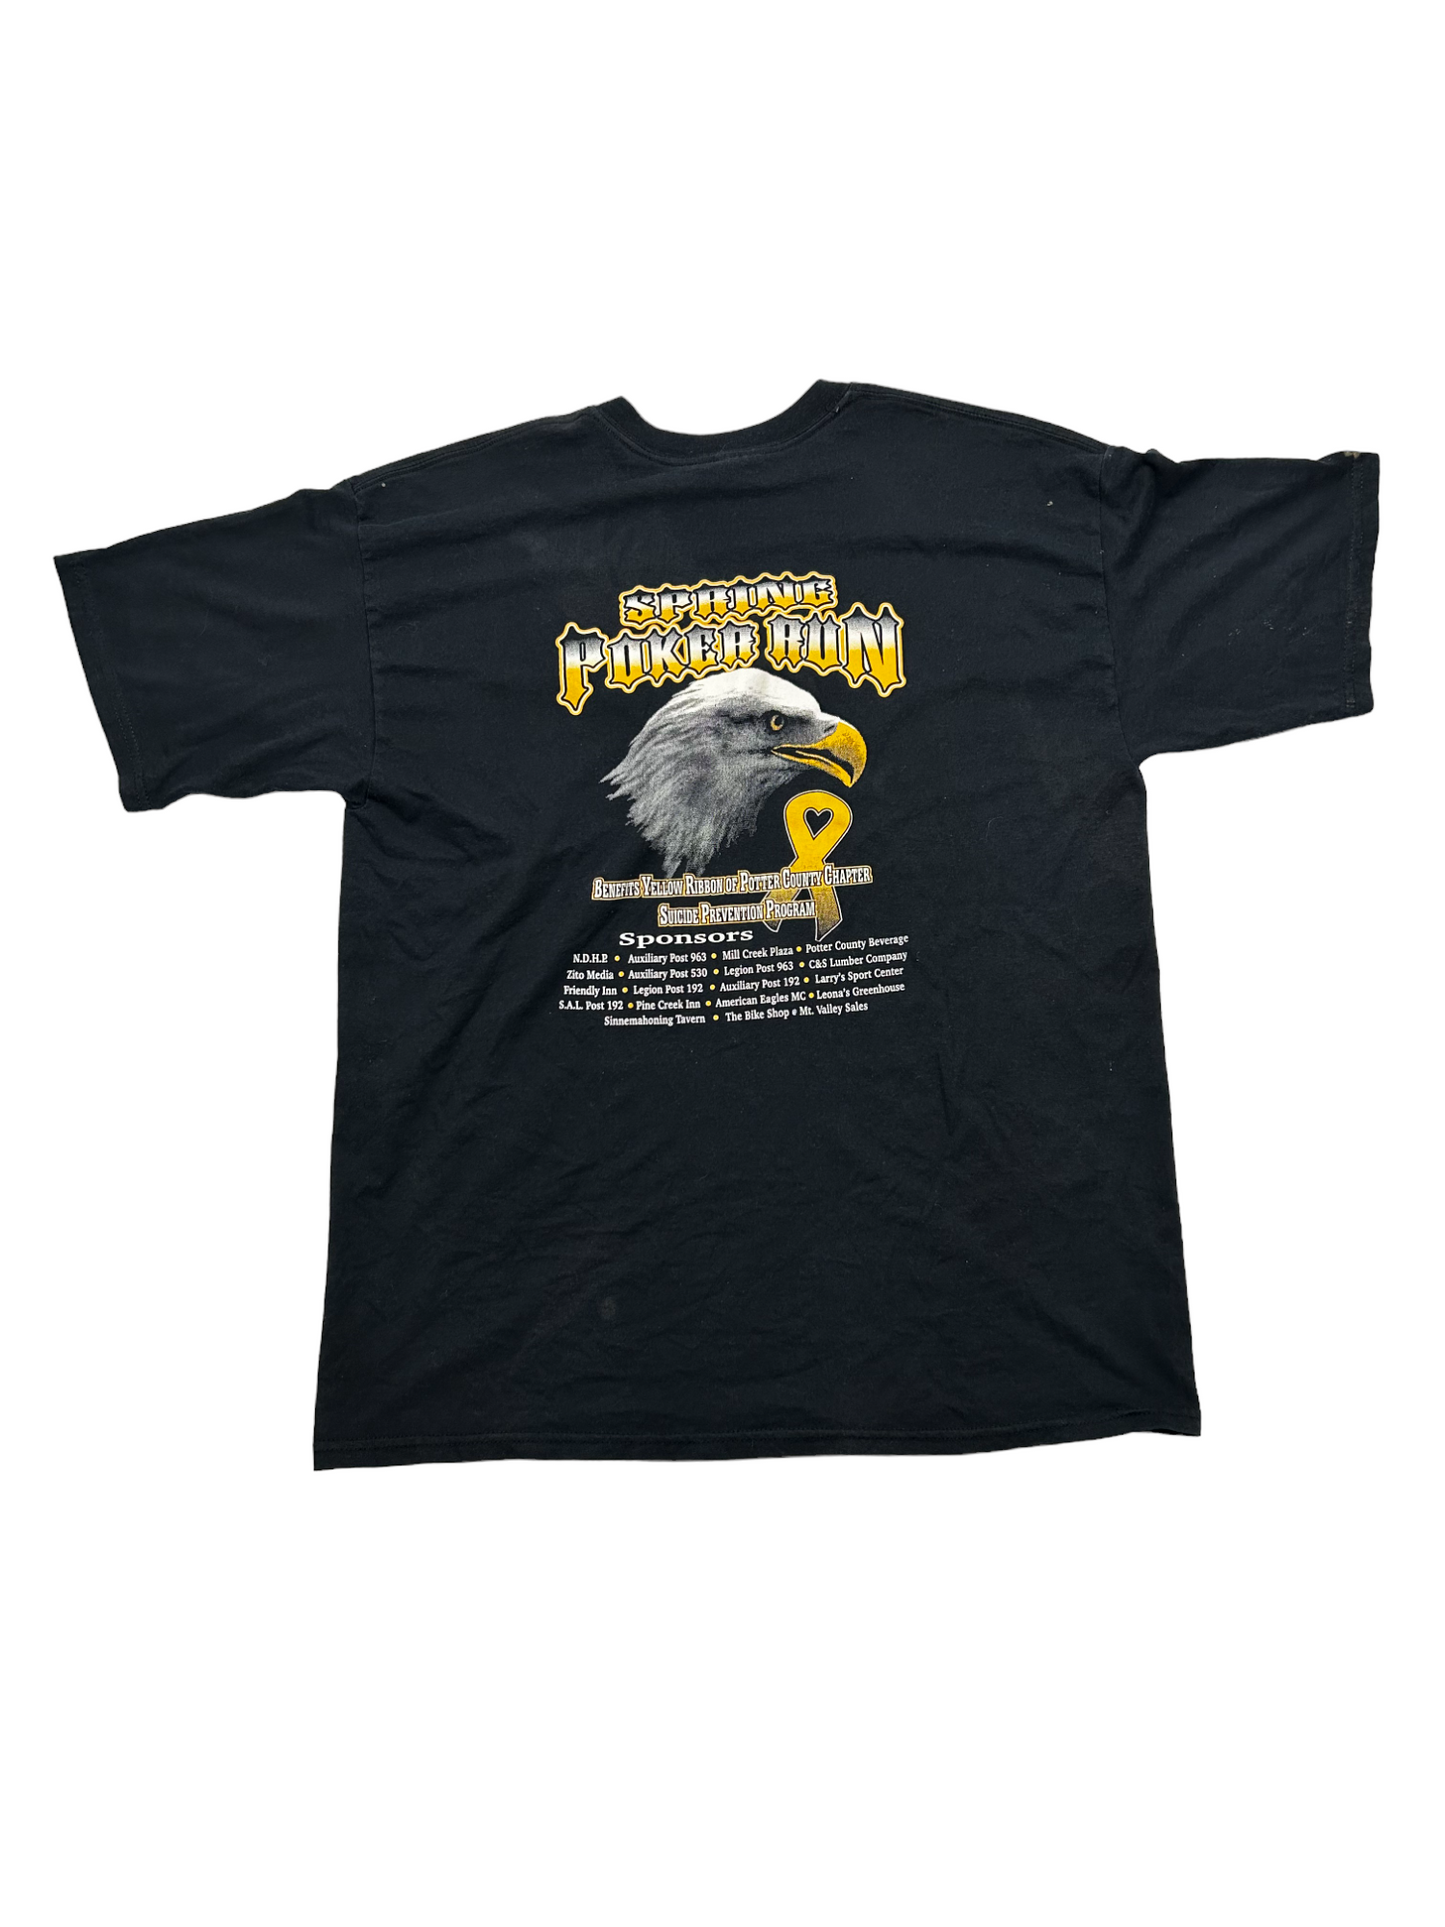 Allegheny River Riders T-Shirt